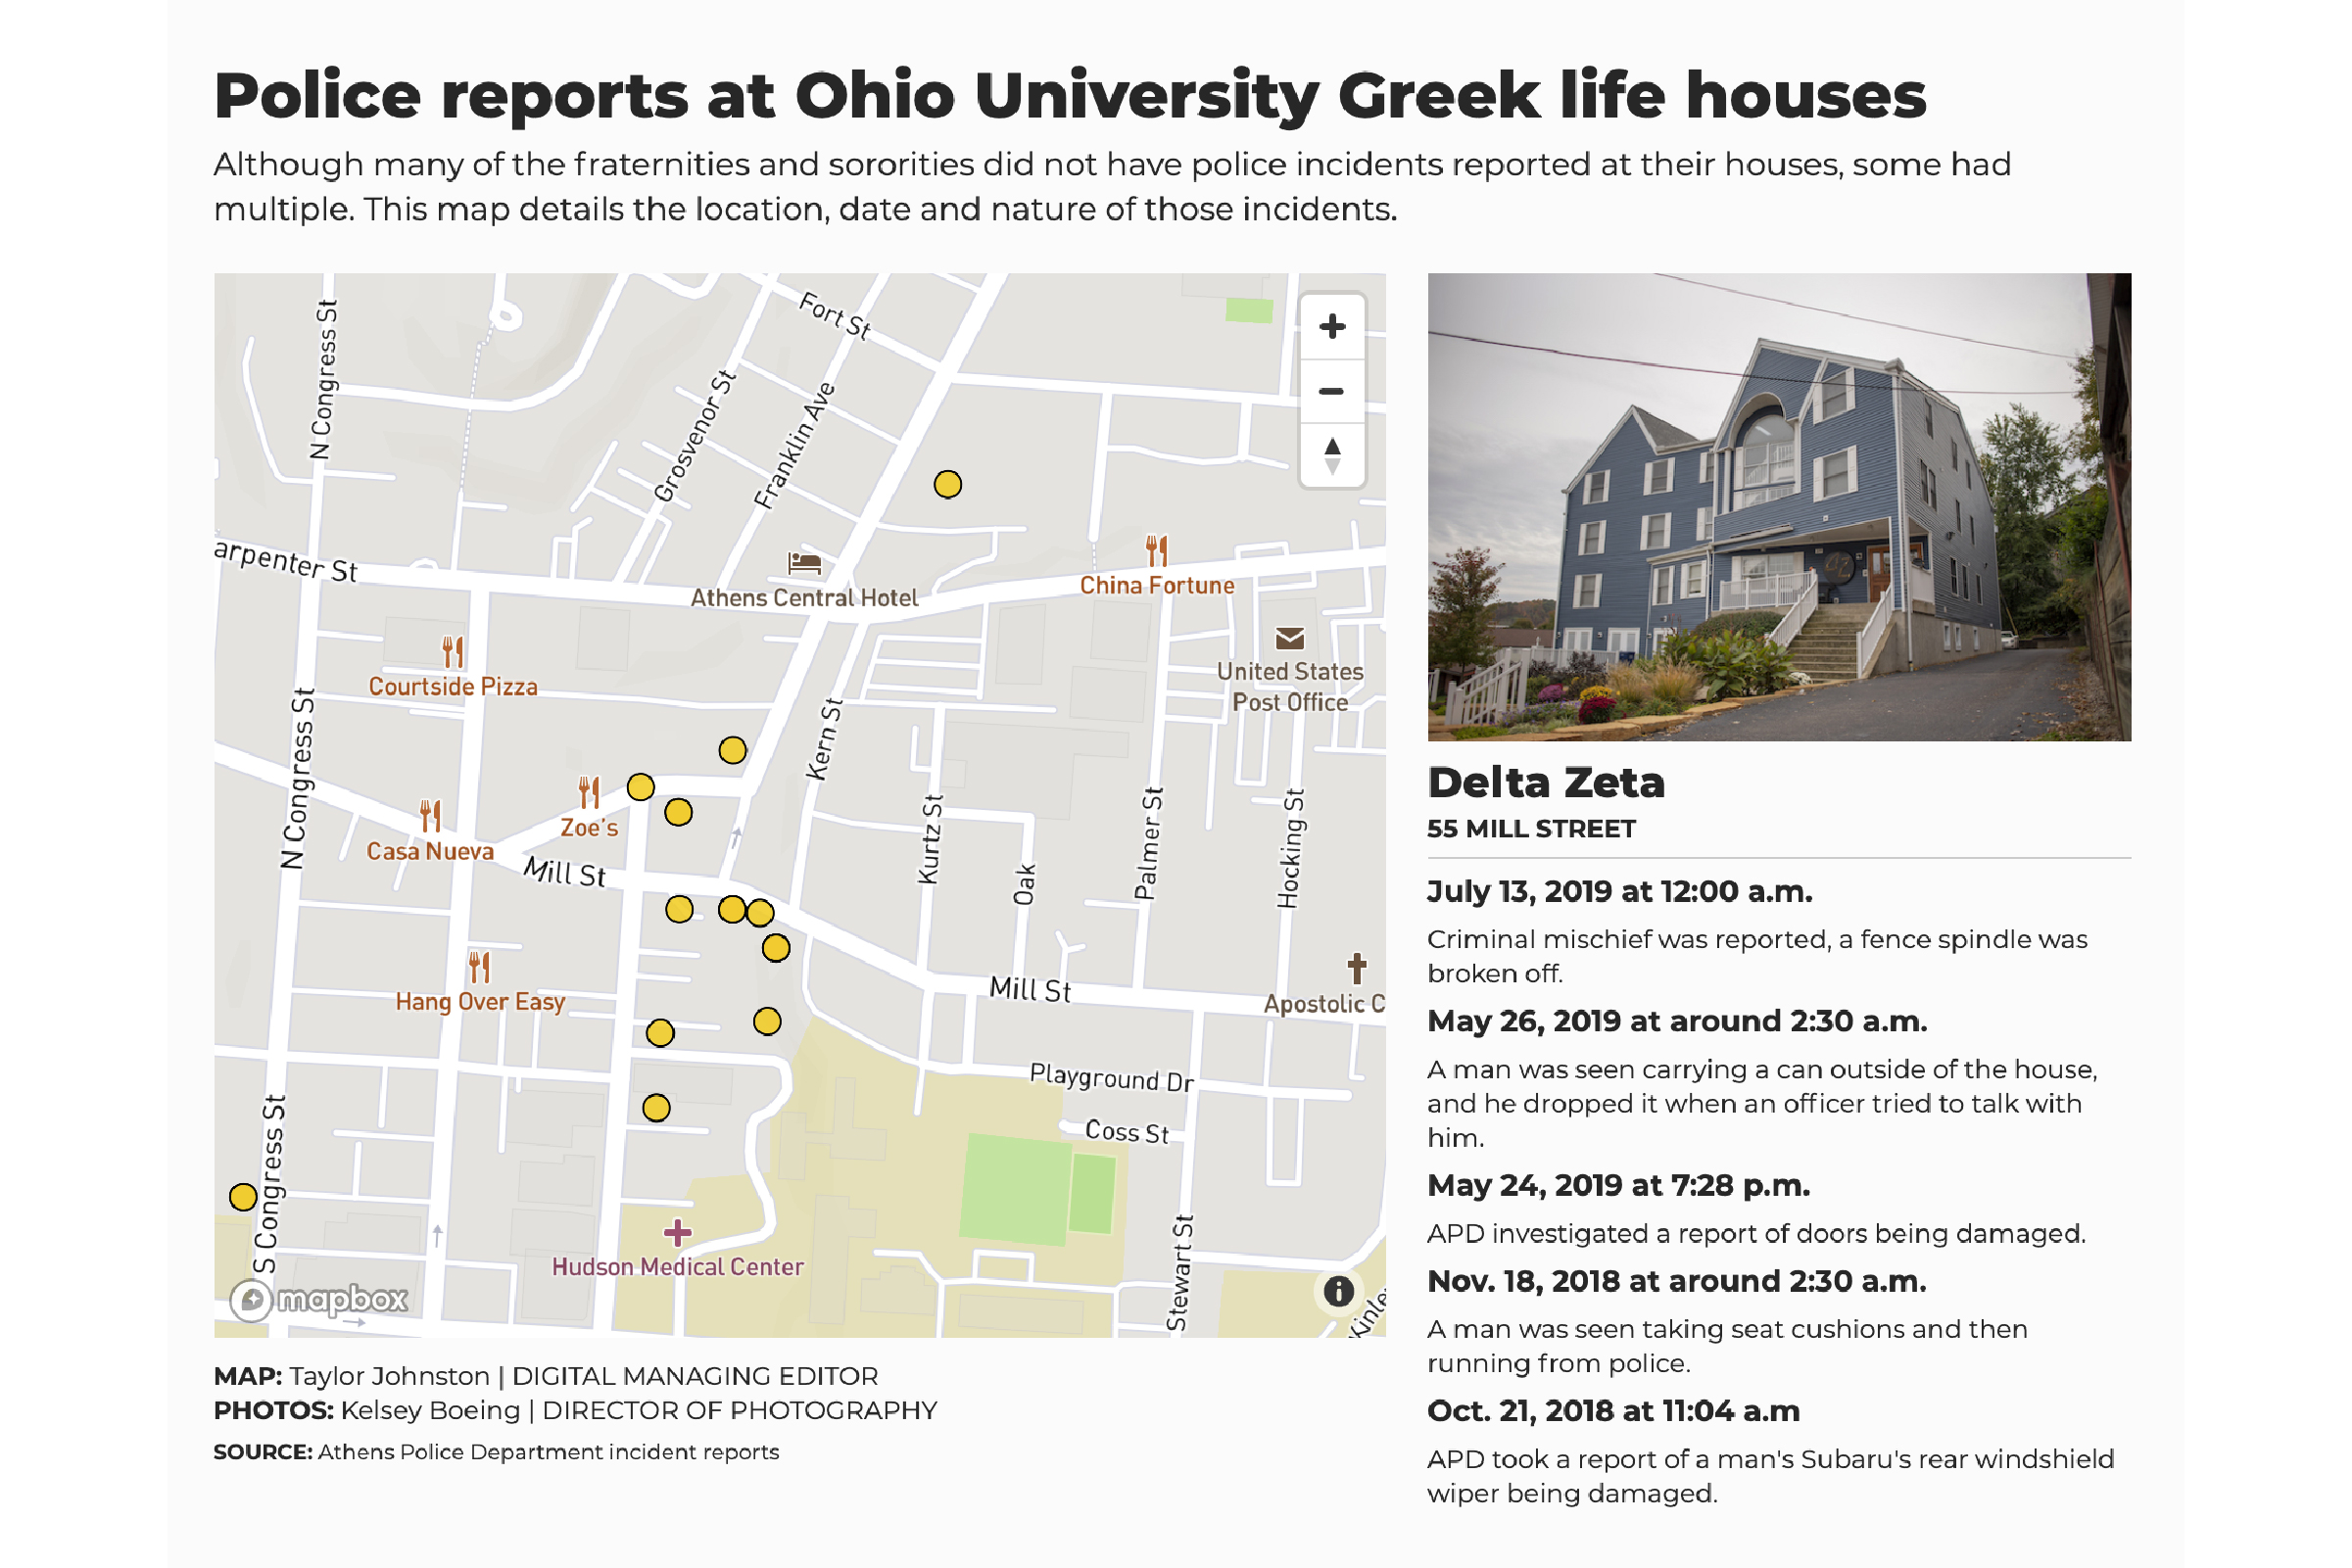 Map of police reports at Ohio University Greek Life houses